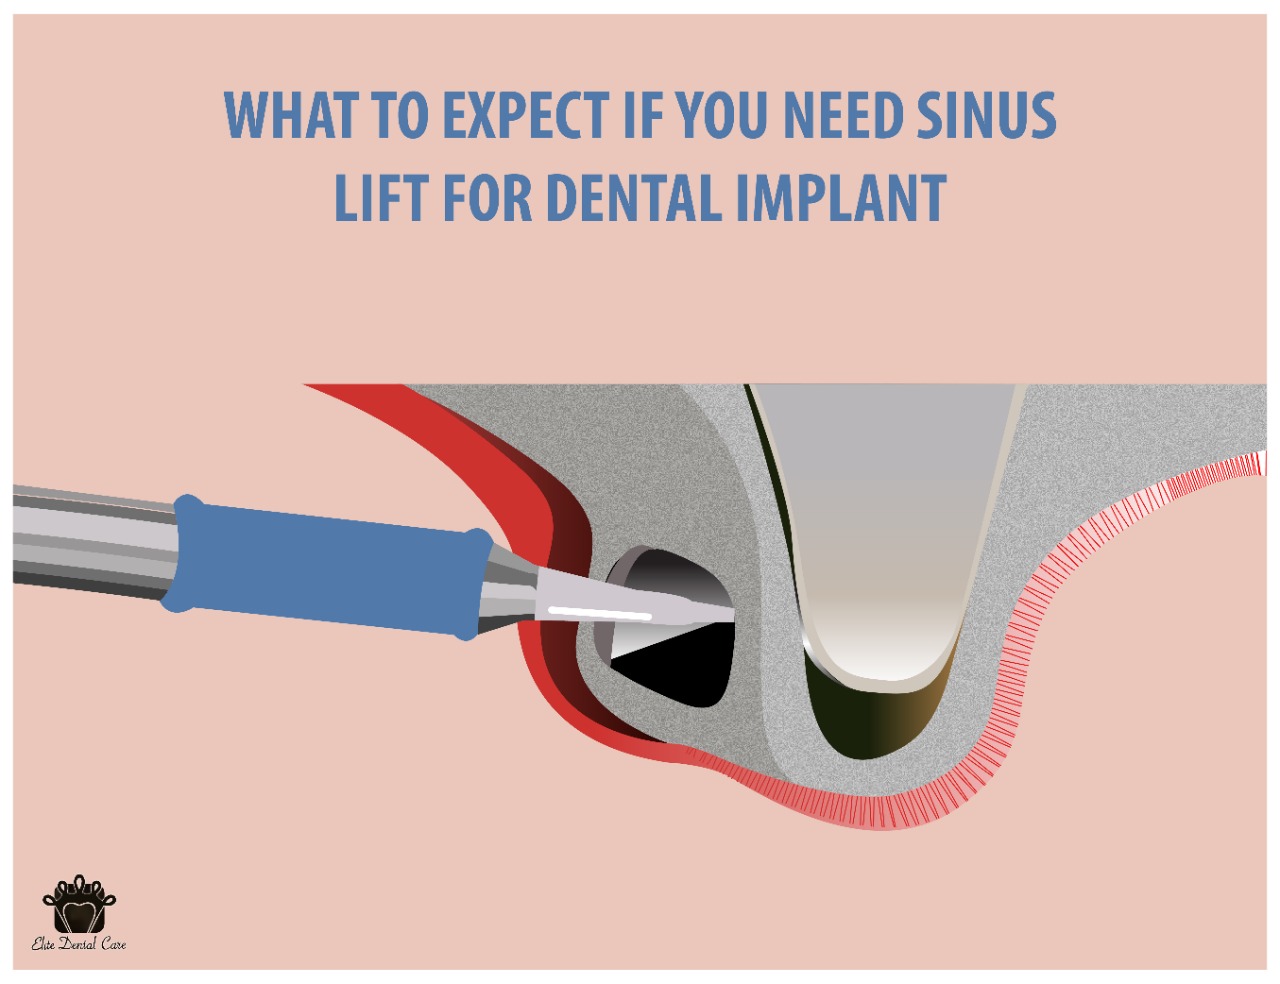 What to Expect if You Need a Sinus Lift for Dental Implants